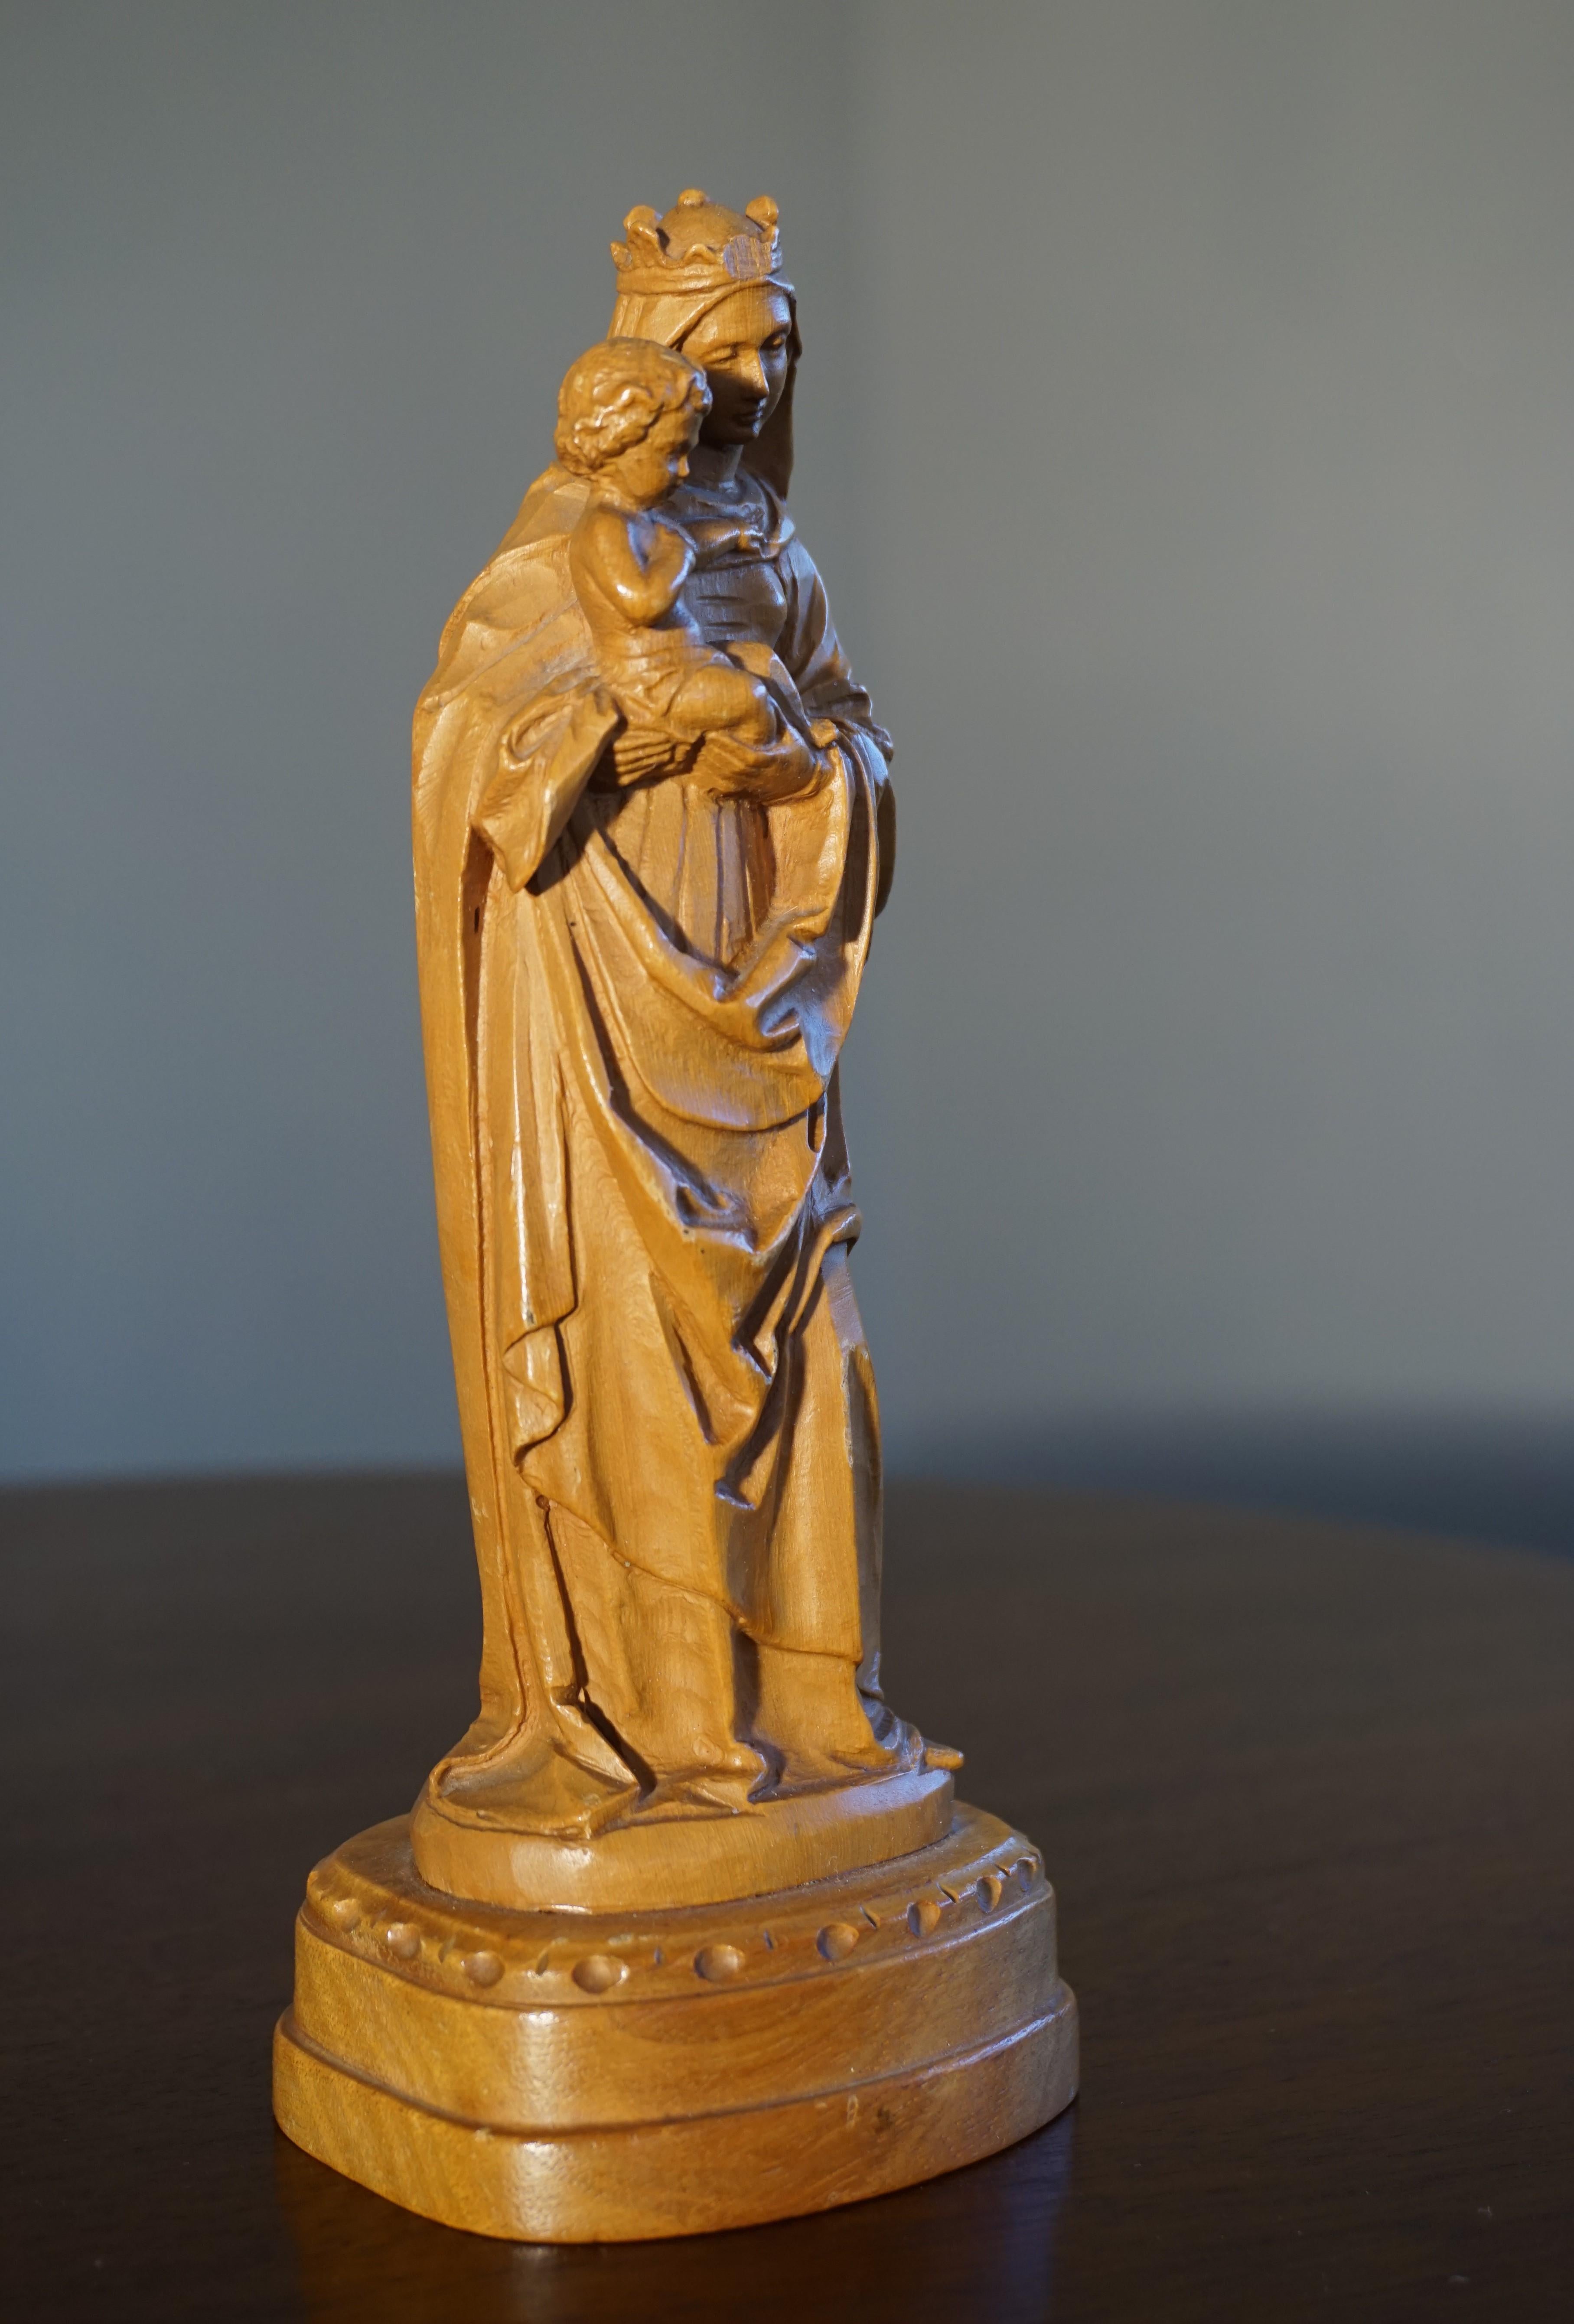 European Finest Quality, Hand Carved Miniature Statue of Mother Mary Holding Child Jesus